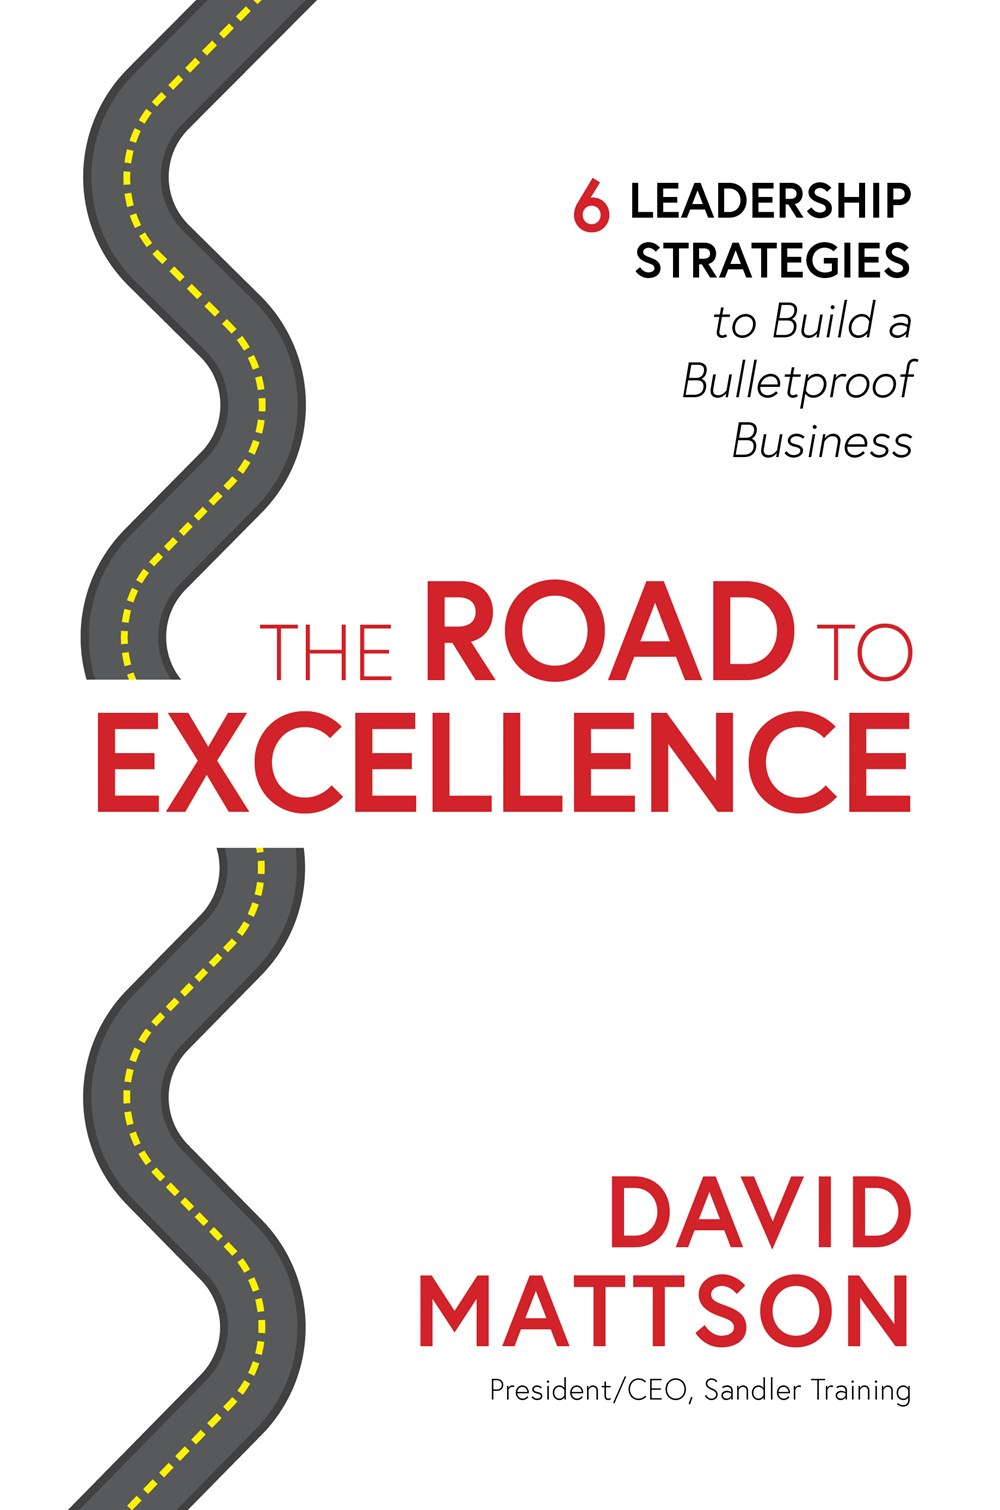 ROAD TO EXCELLENCE 6 Leadership Strategies To Build A Bulletproof Business